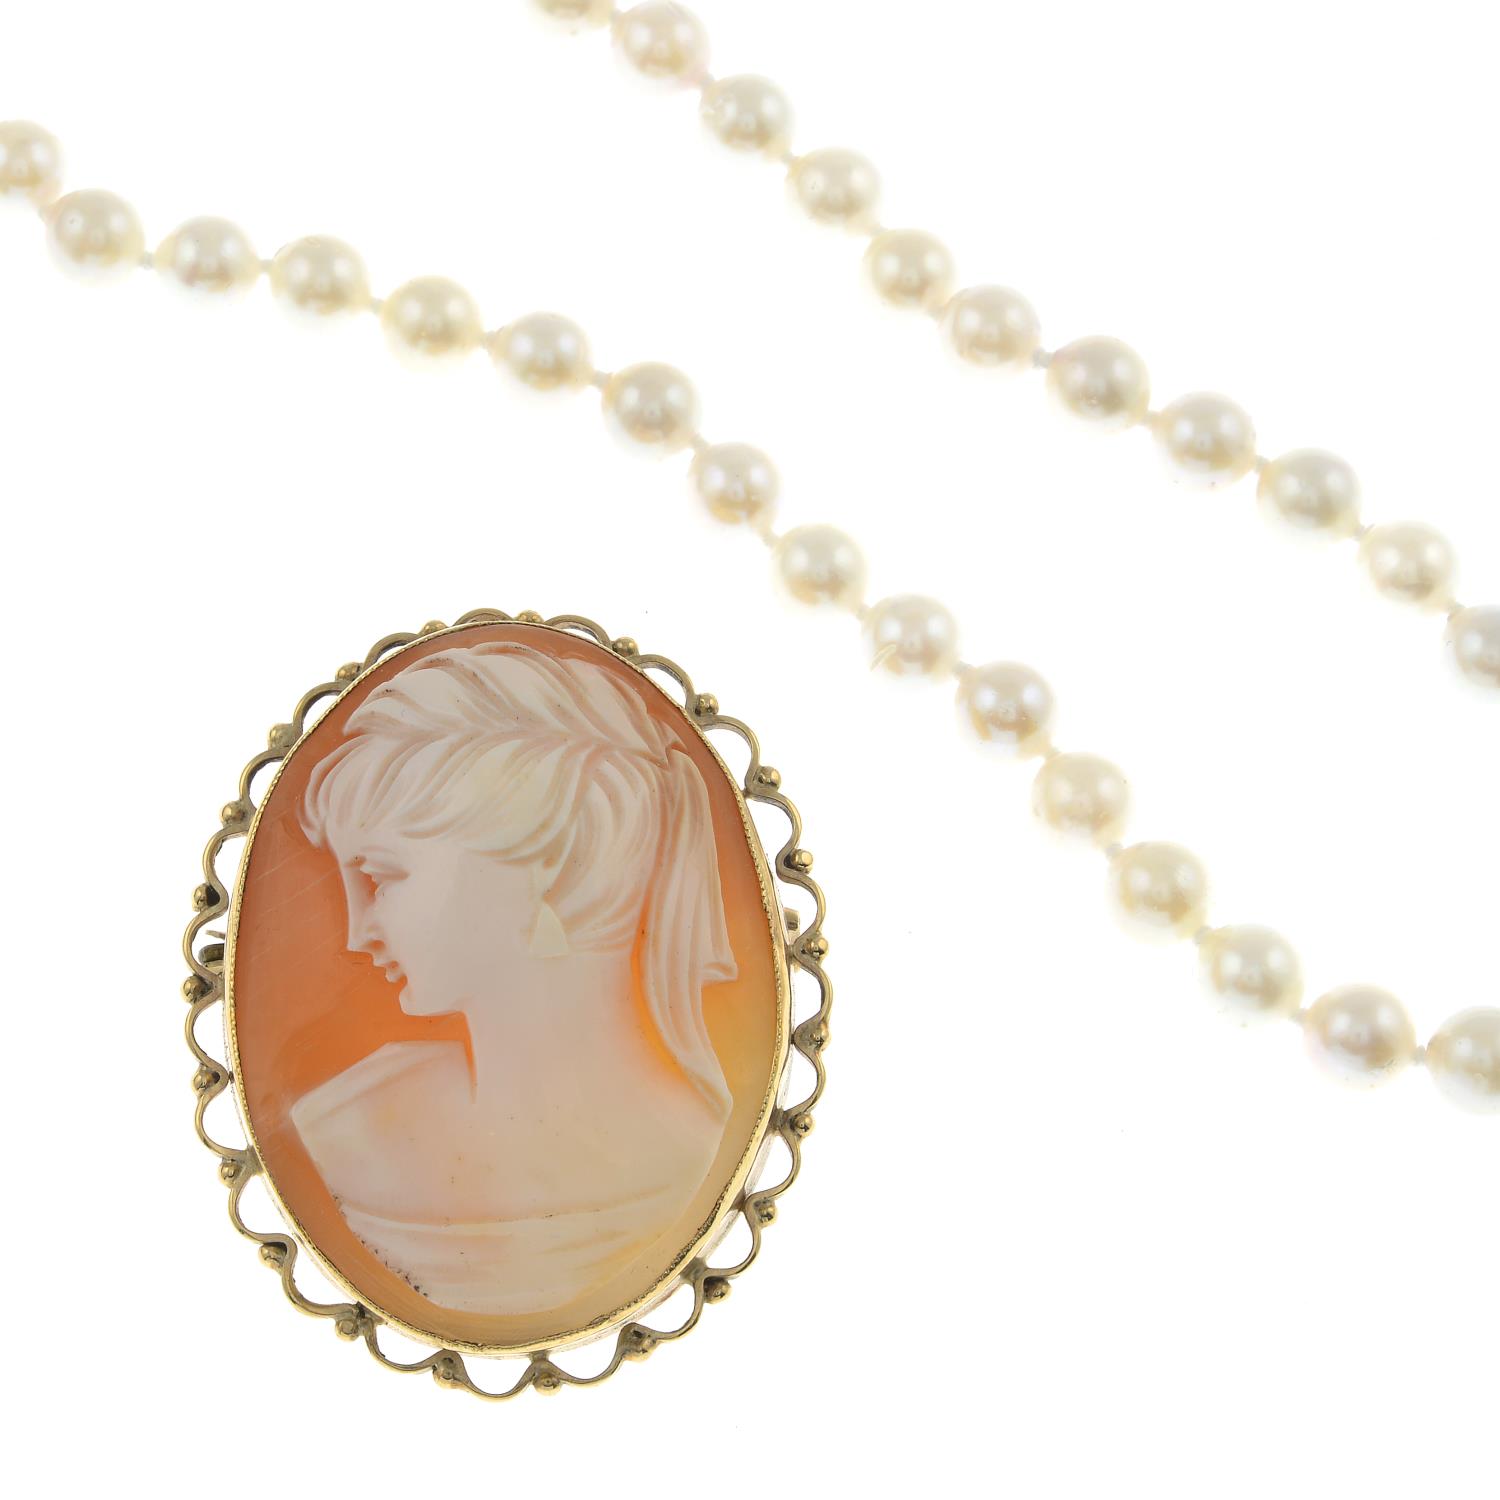 Shell cameo brooch, stamped 9CT, length 4.5cms, total weight 15.7gms.